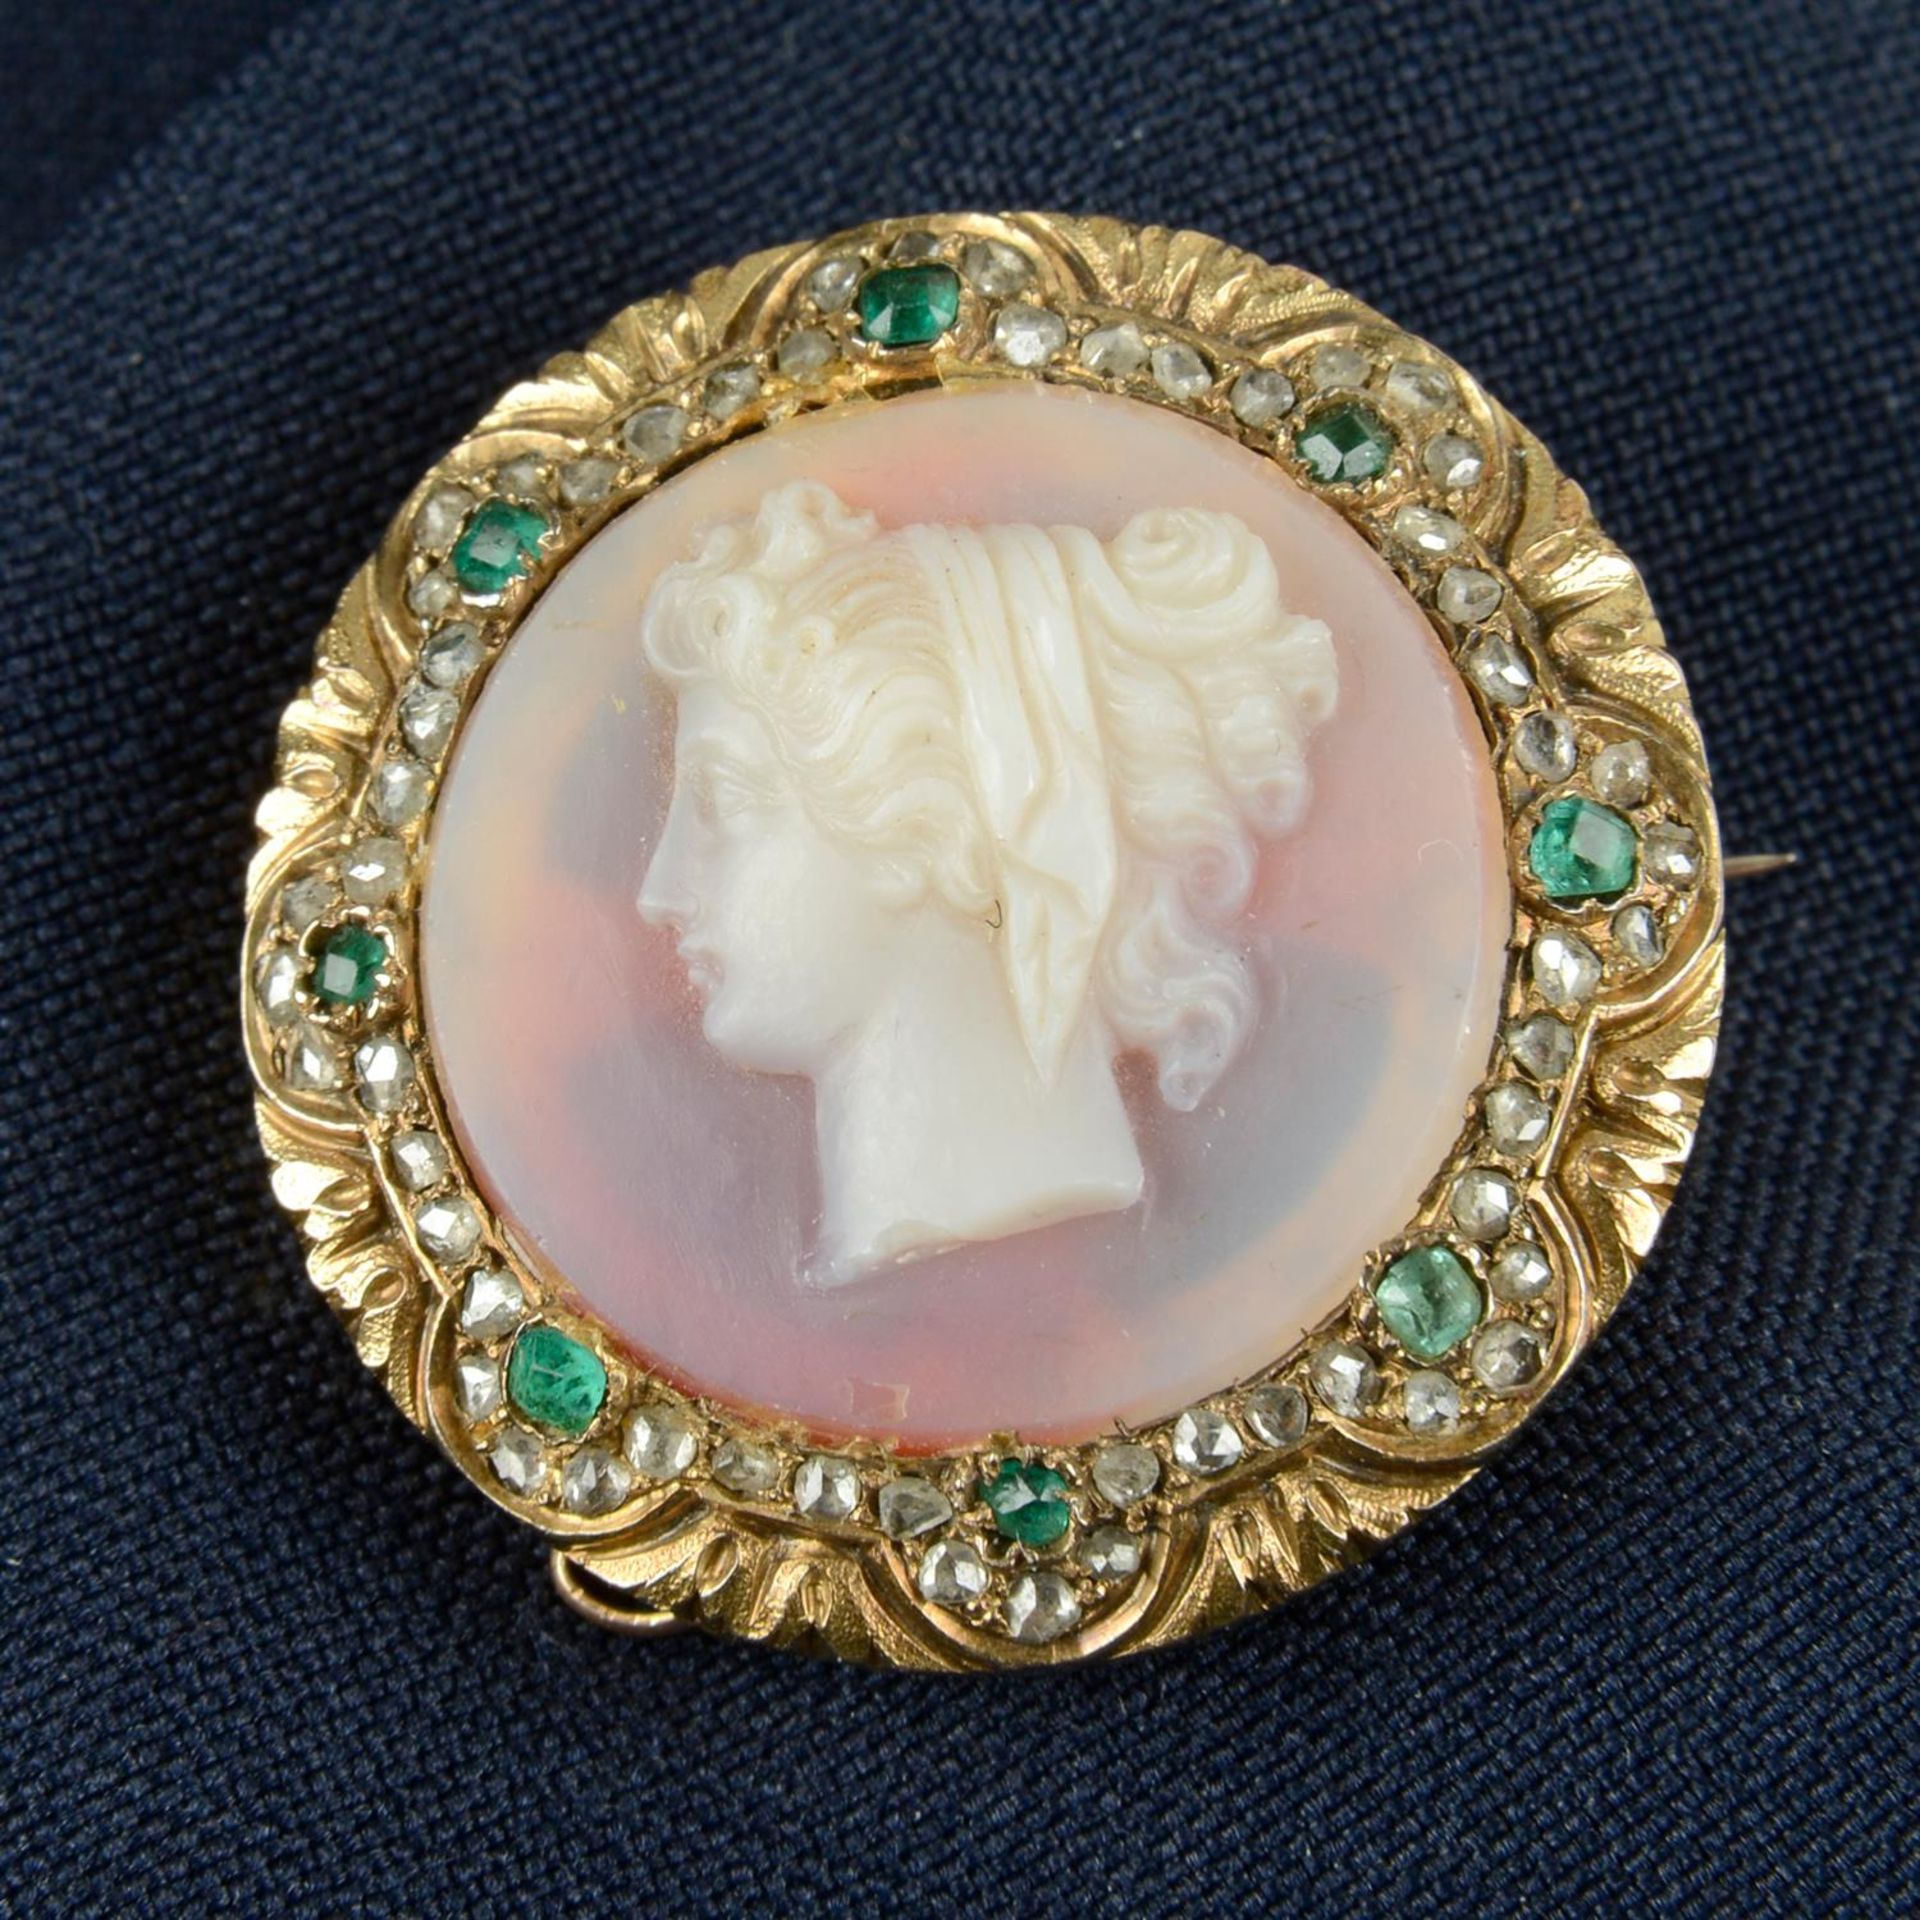 A mid Victorian gold sardonyx cameo brooch, depicting Hera in profile, with emerald and rose-cut